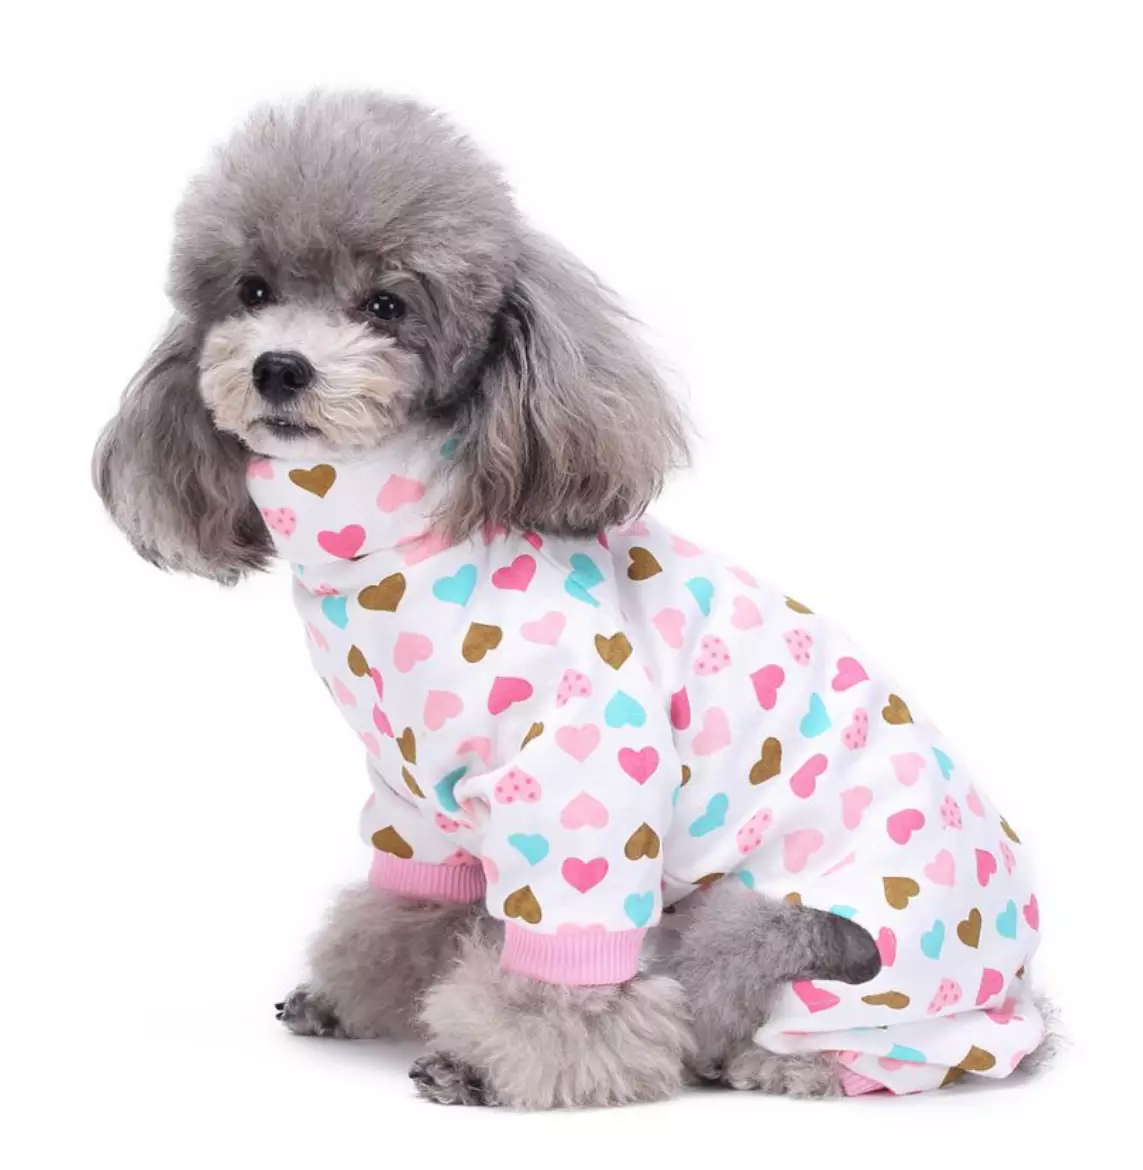 Dachshund Everywhere are selling pyjamas for small dogs and they look adorable (